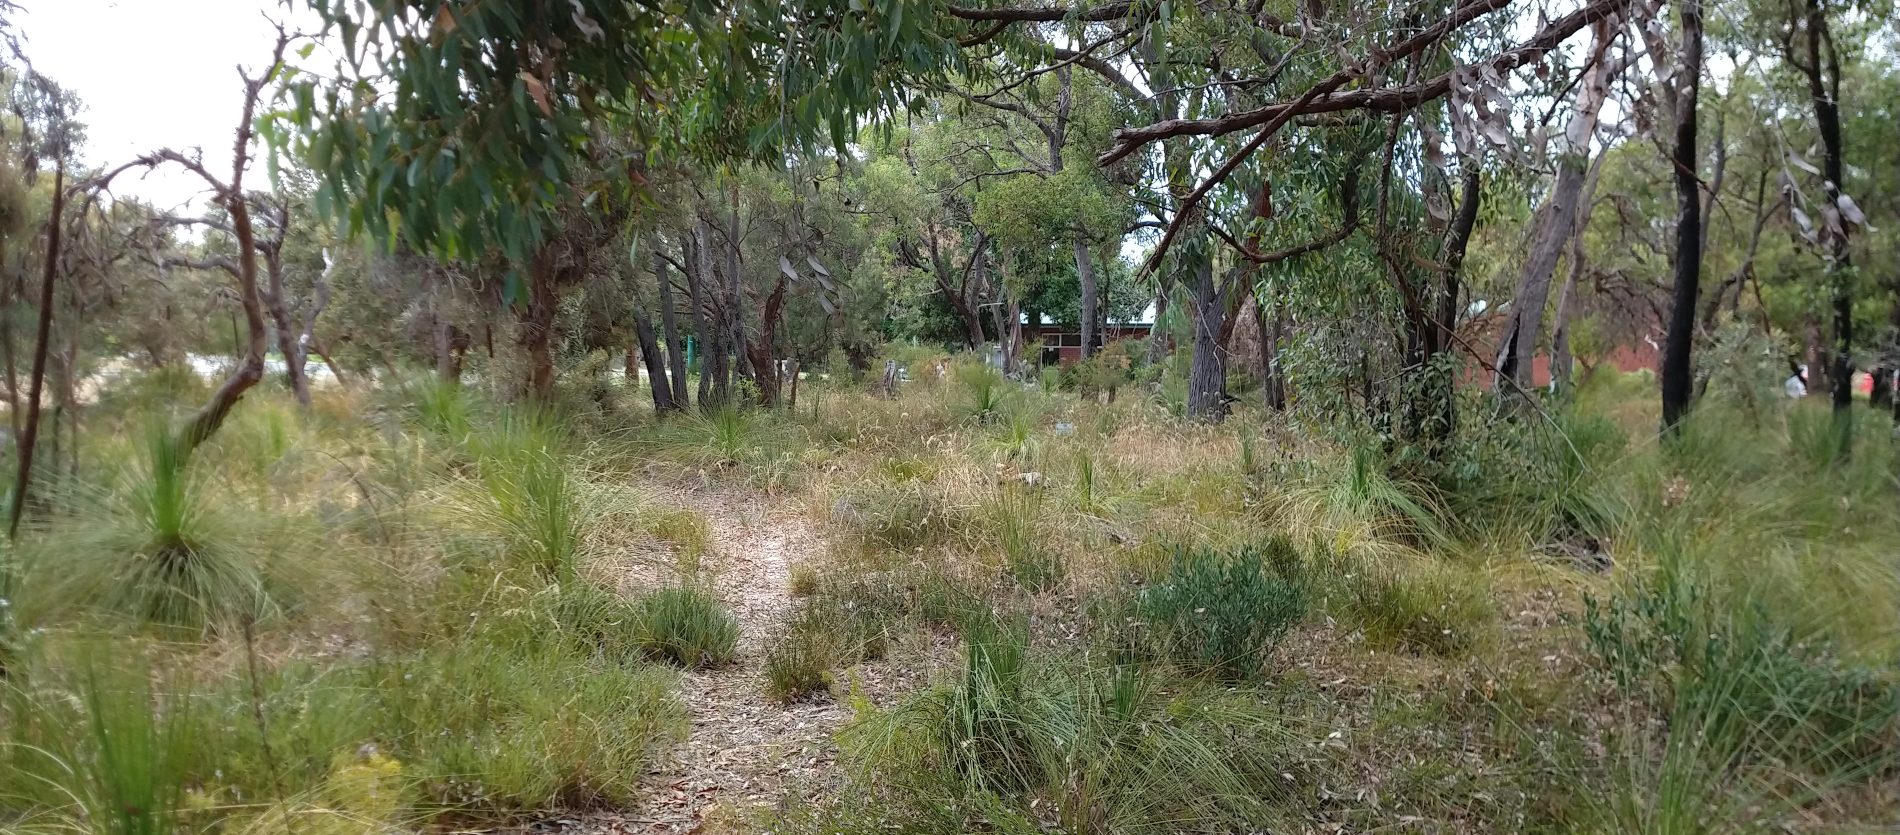 A small patch of Urban bushland in High Wycombe, with a diverse shrubby understory below a dense canopy of Gum trees and Banksias